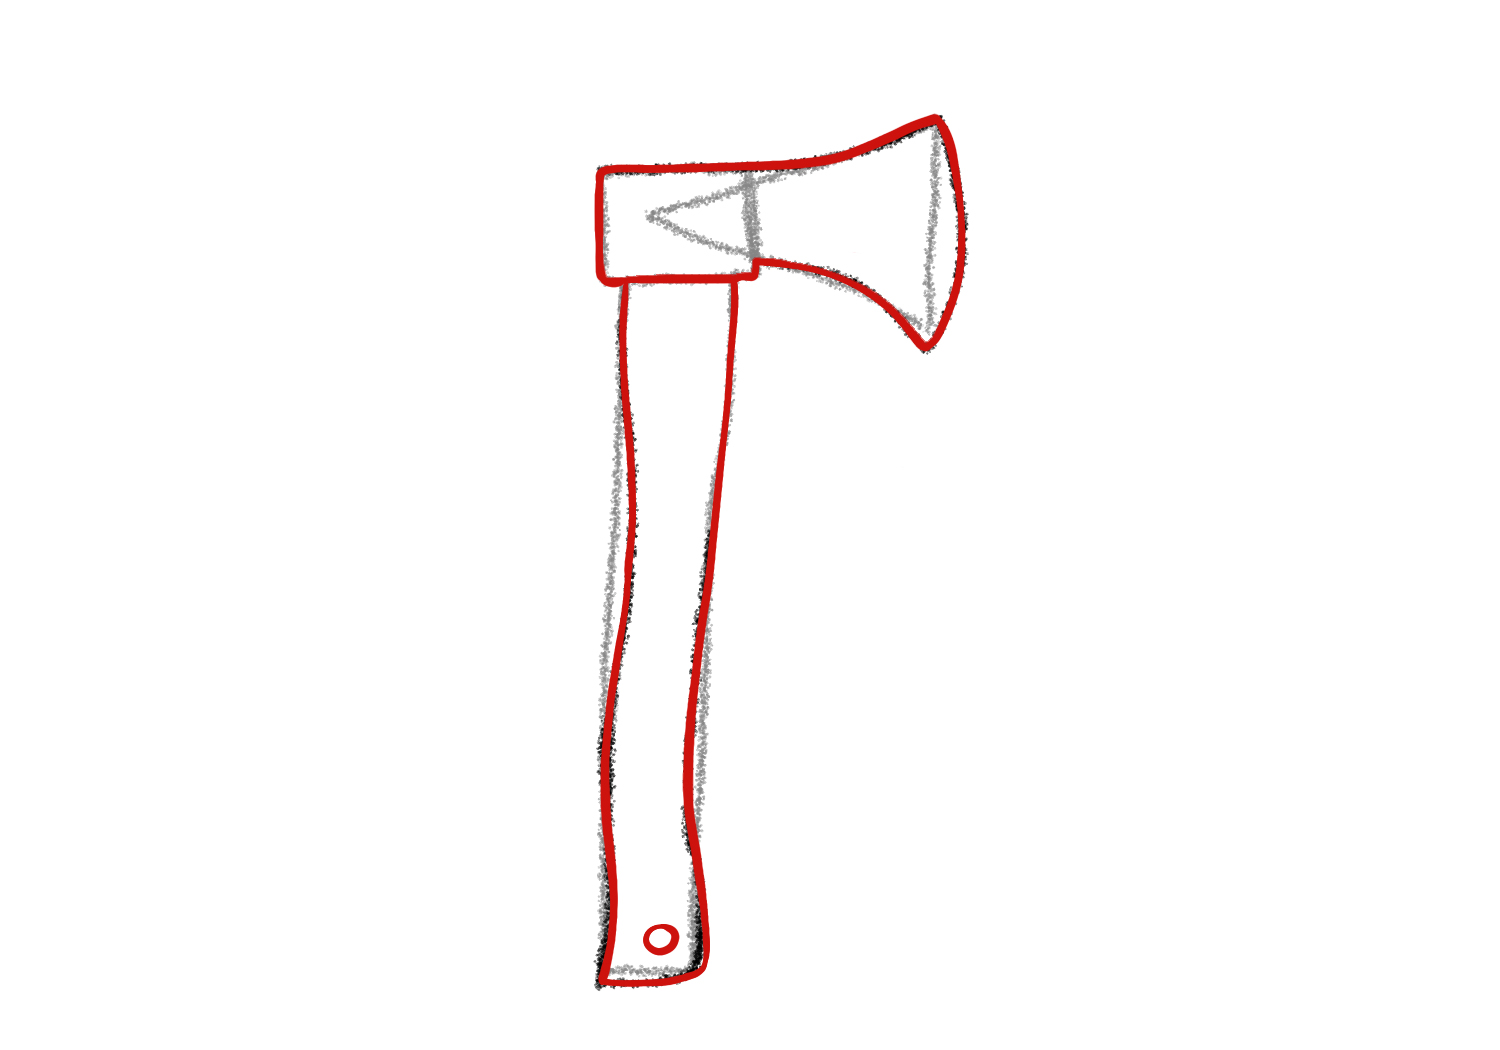 Axe Drawing Picture